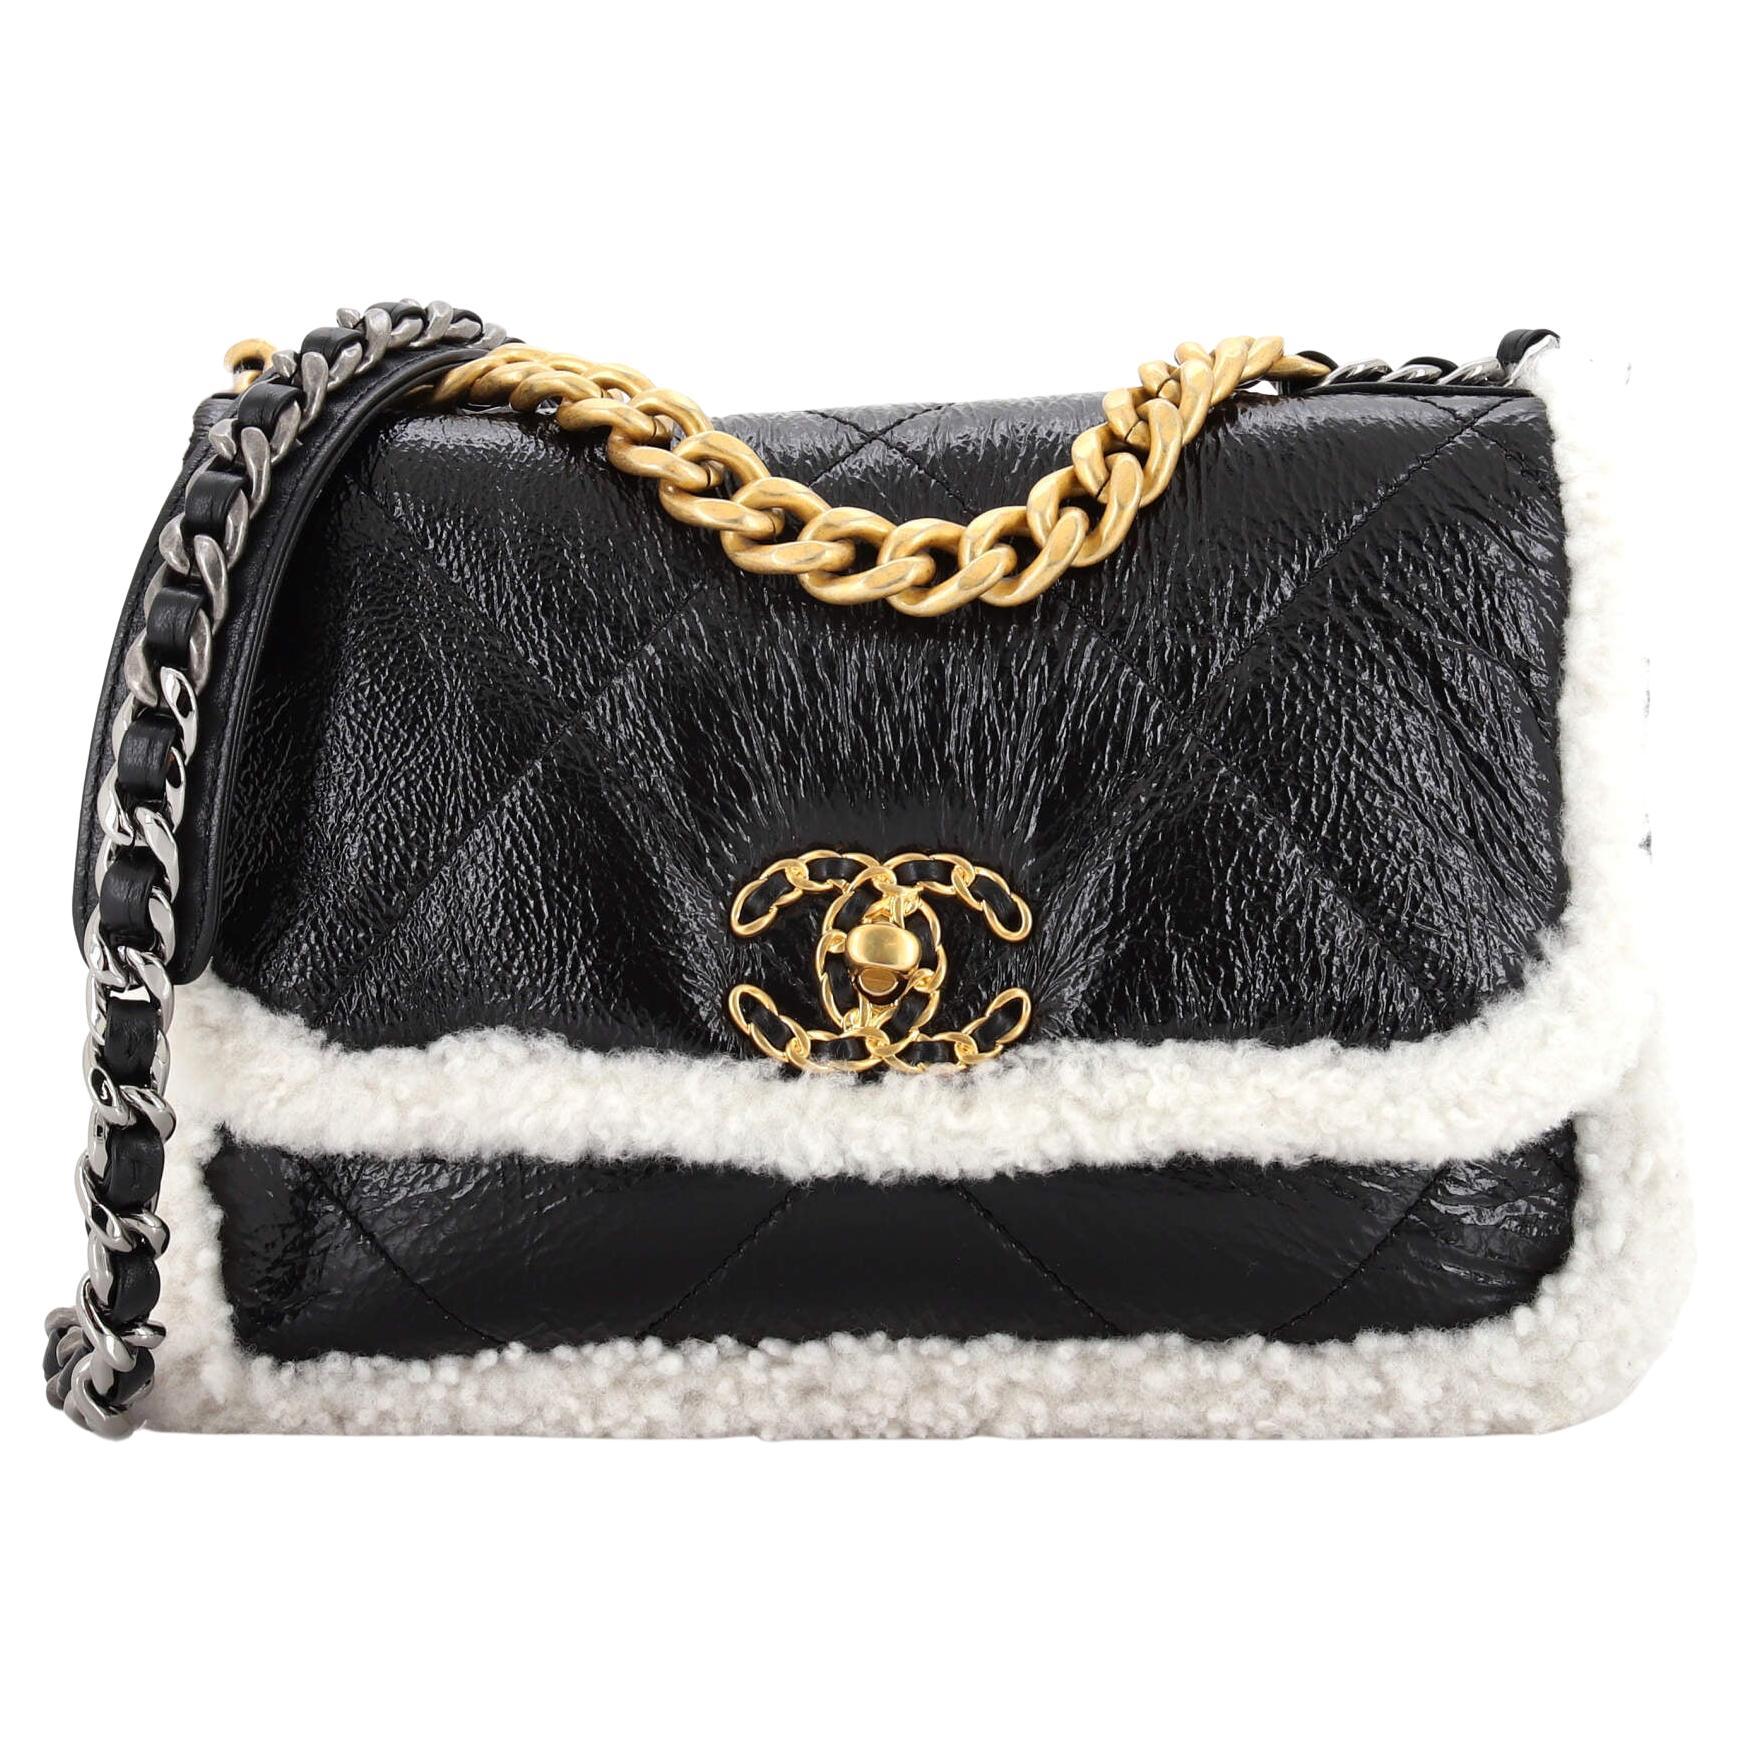 Chanel - Chanel 19 Shiny Lambskin Zip-Around Coin Purse with Gold Hardware